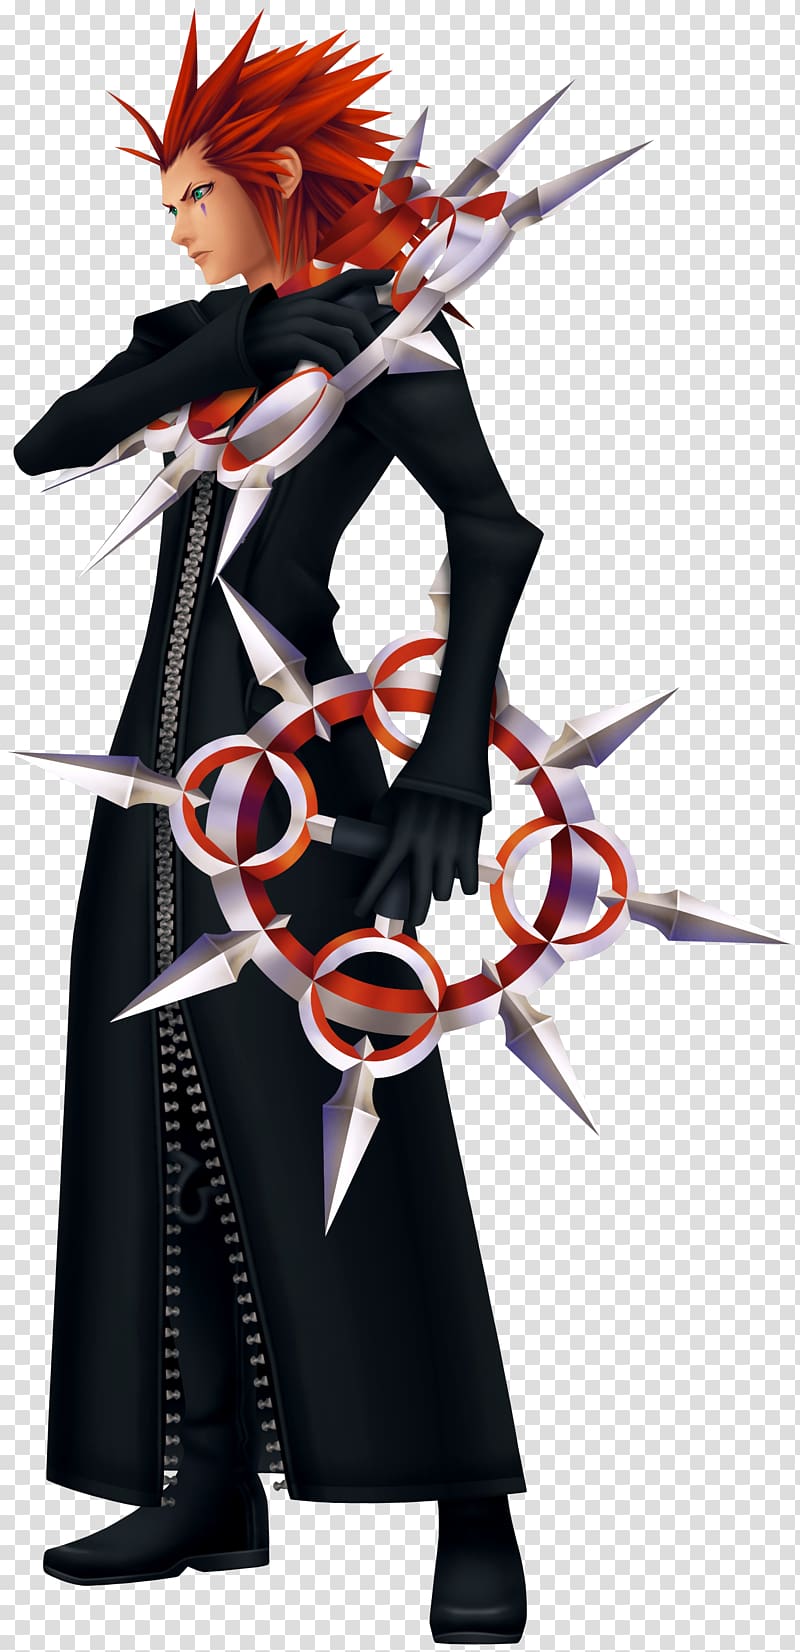 Kingdom Hearts II Kingdom Hearts 358/2 Days Kingdom Hearts HD 2.5 Remix Kingdom Hearts: Chain of Memories, kingdom hearts transparent background PNG clipart